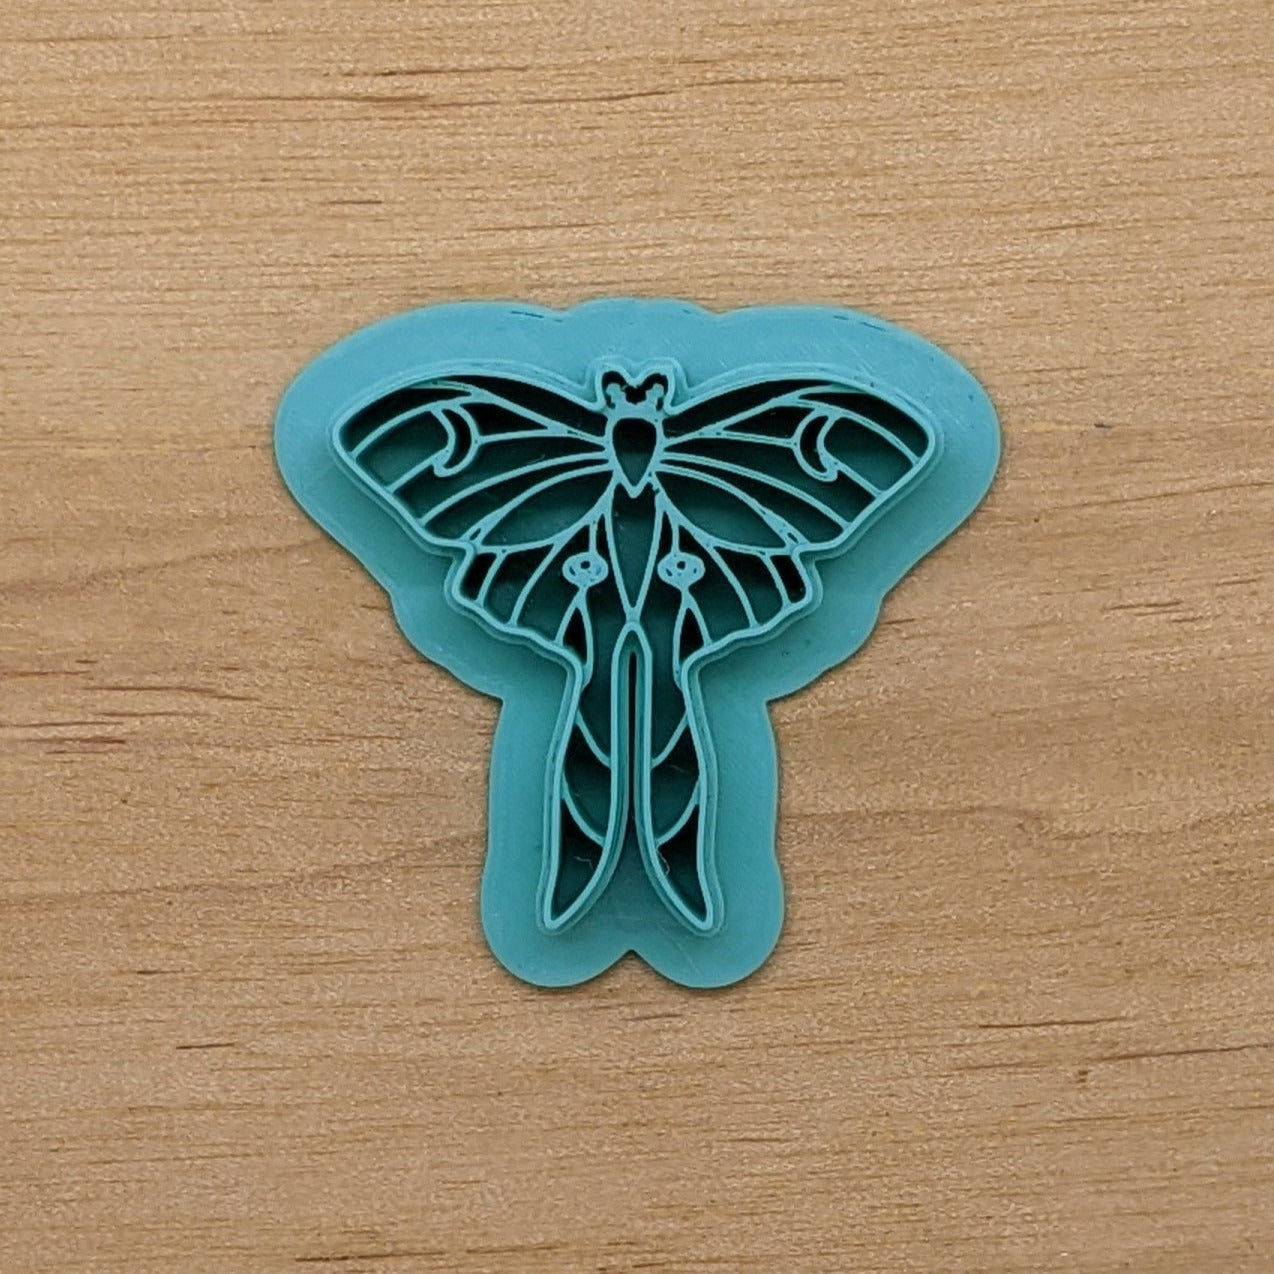 Luna Moth Cookie Cutter: Perfect for Ceramics, Pottery, Polymer Clay & Fondant Crafting